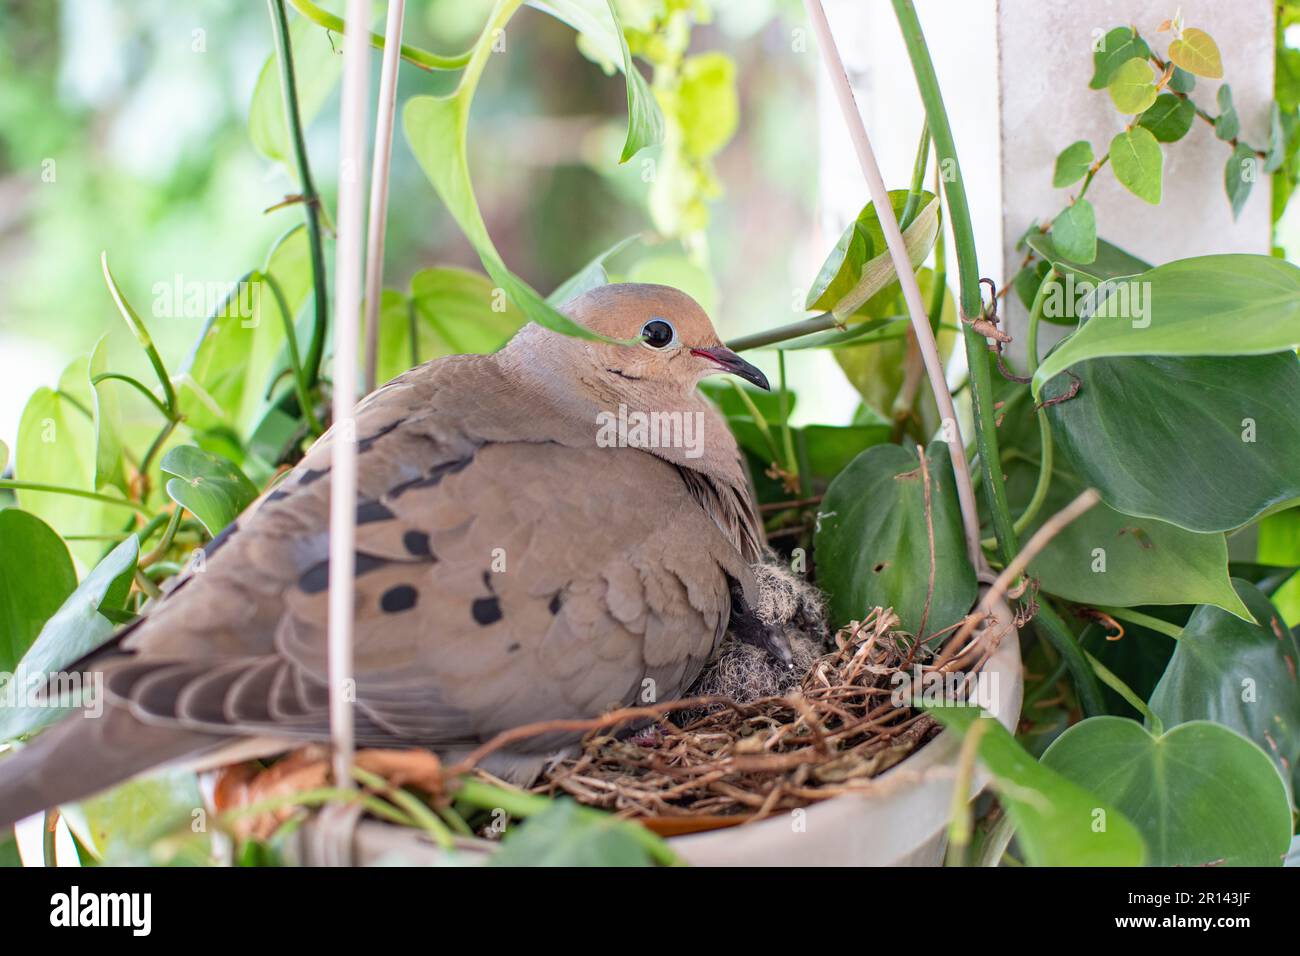 Mourning dove mama bird with a baby bird sitting in a nest. Pigeon baby bird with mommy Stock Photo